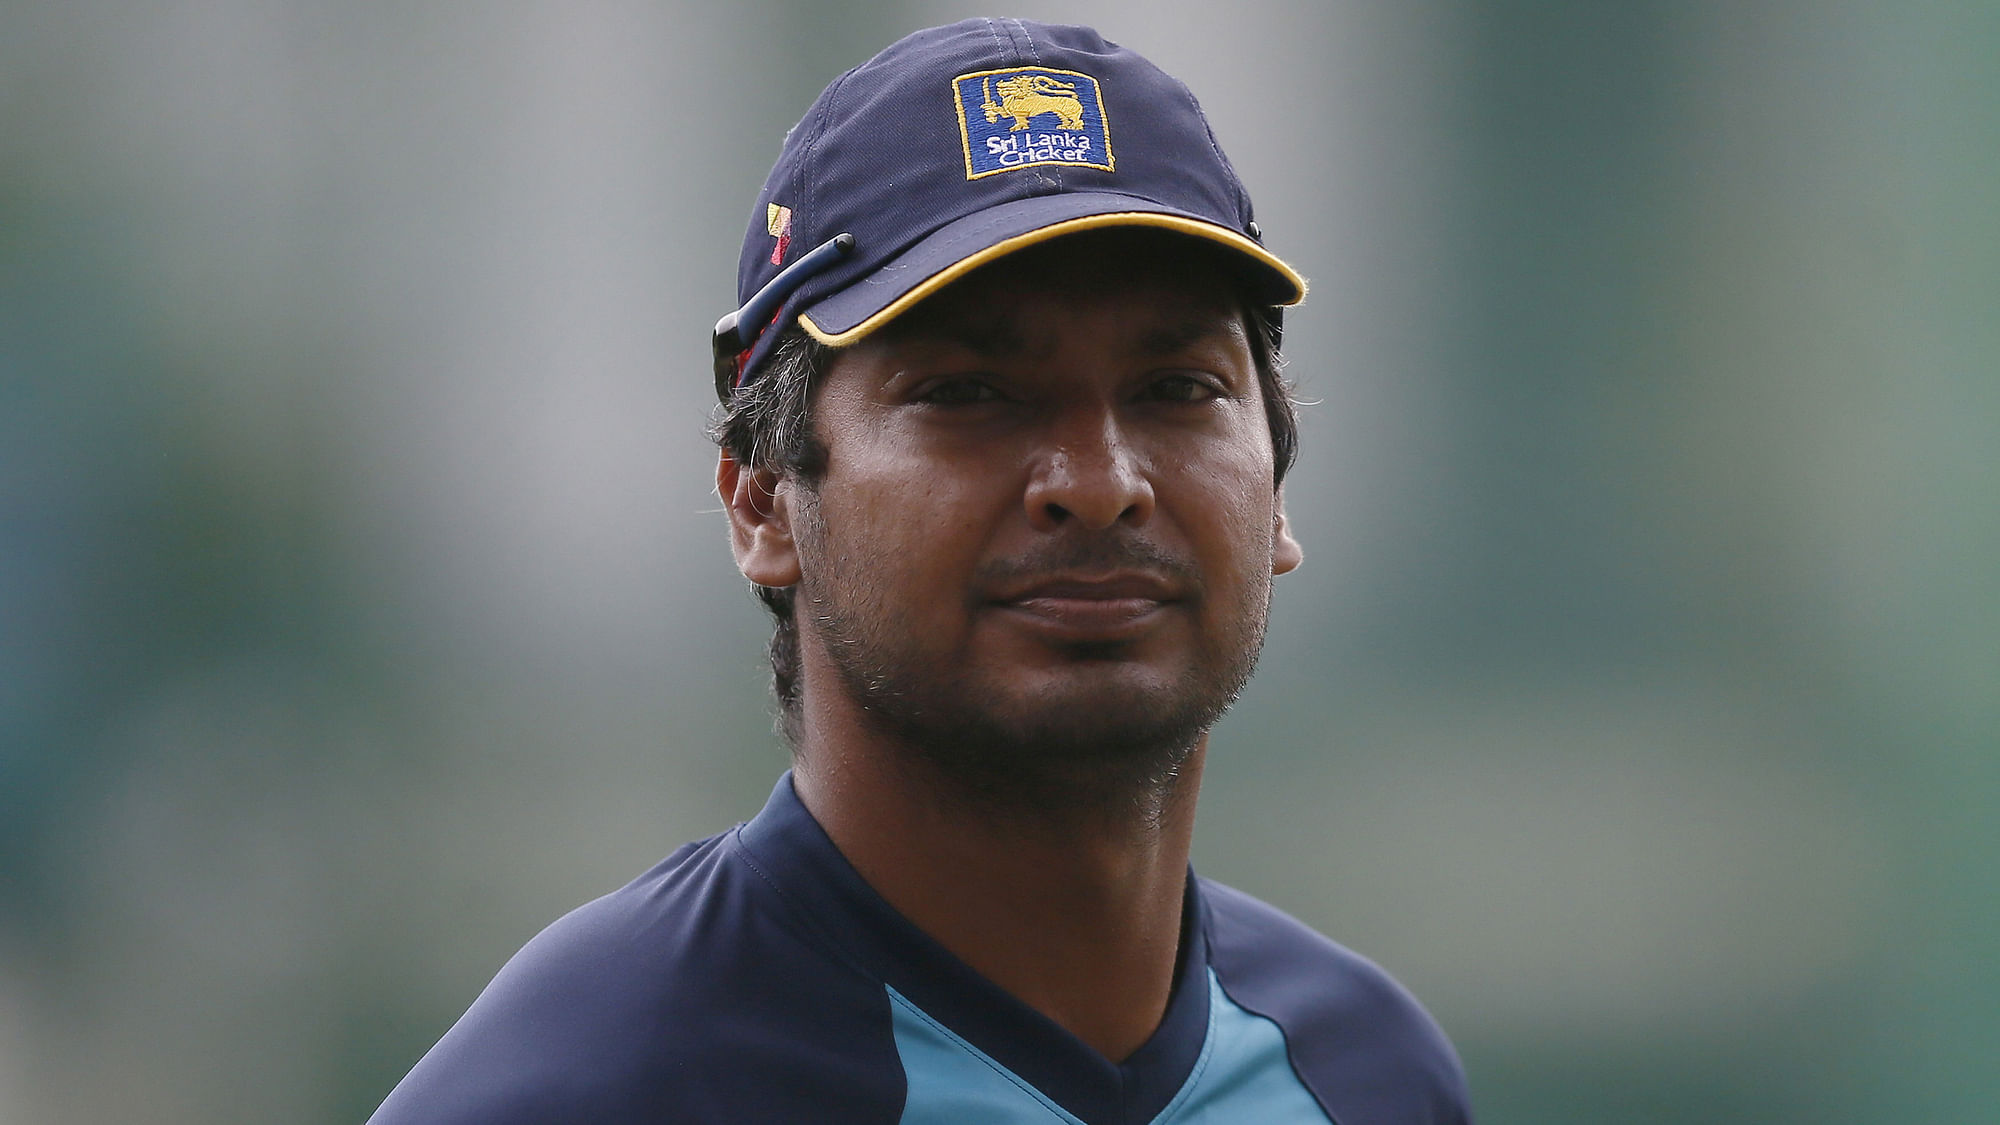 Kumar Sangakkara took to Twitter on 14 May to express his concerns about the rising communal tensions in his country and requested the citizens to heal and rise as a nation.